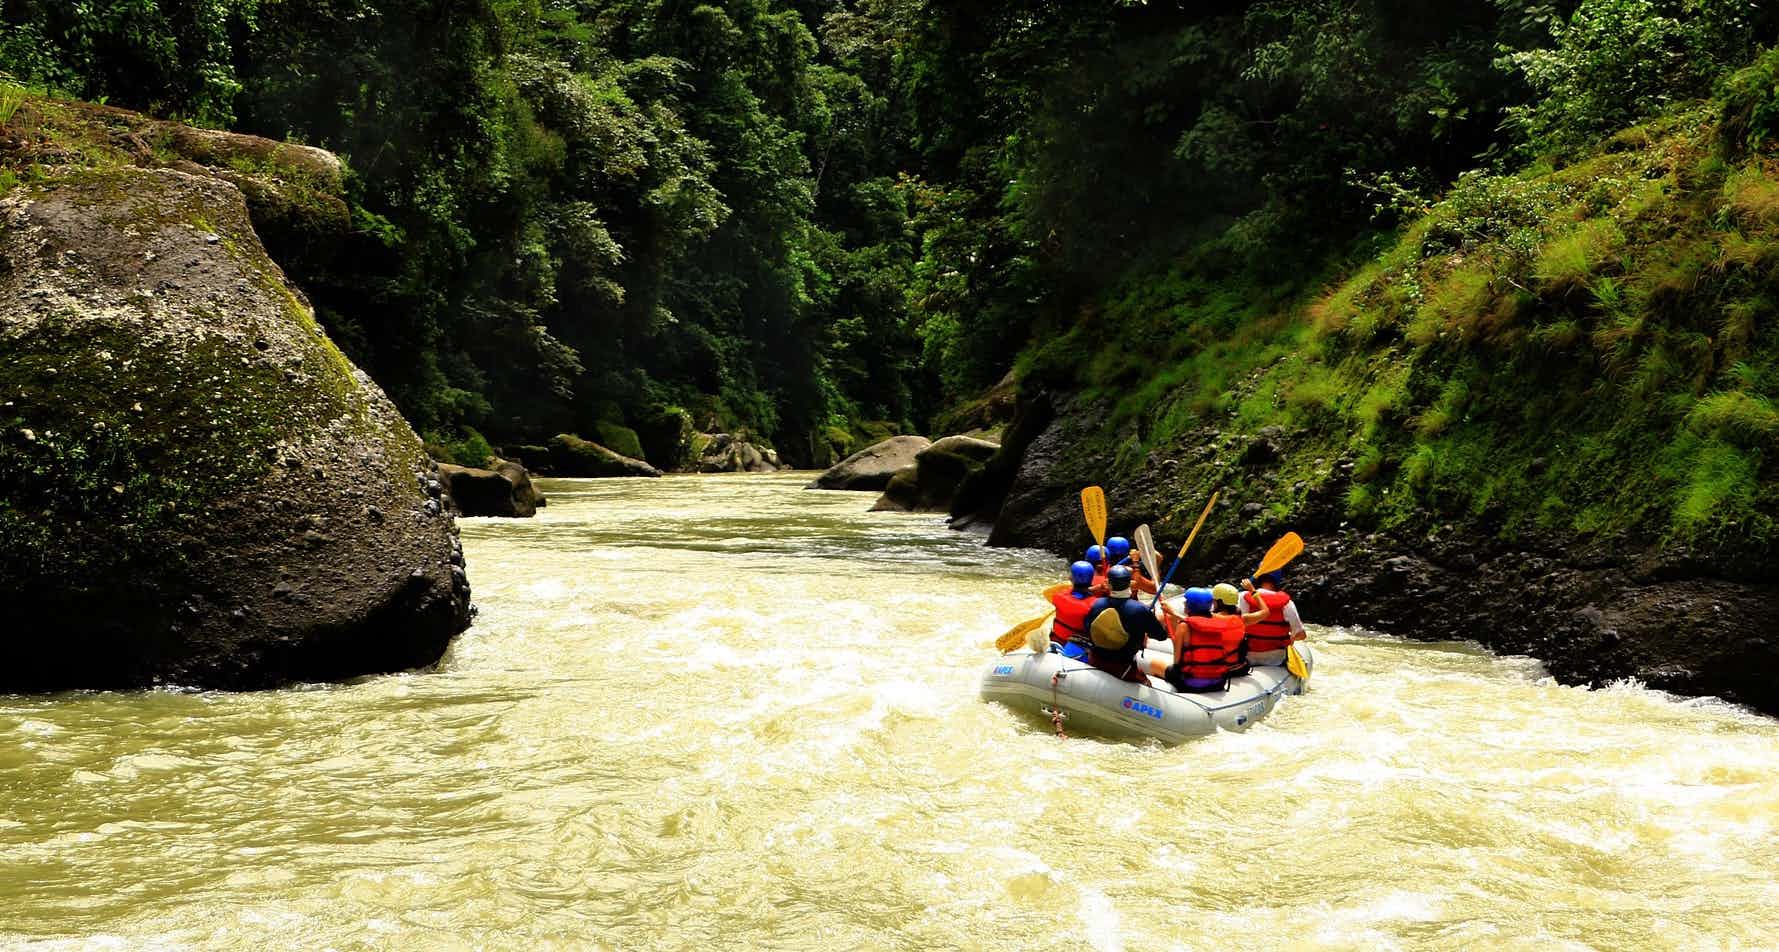 Rafters on a river in Costa Rica